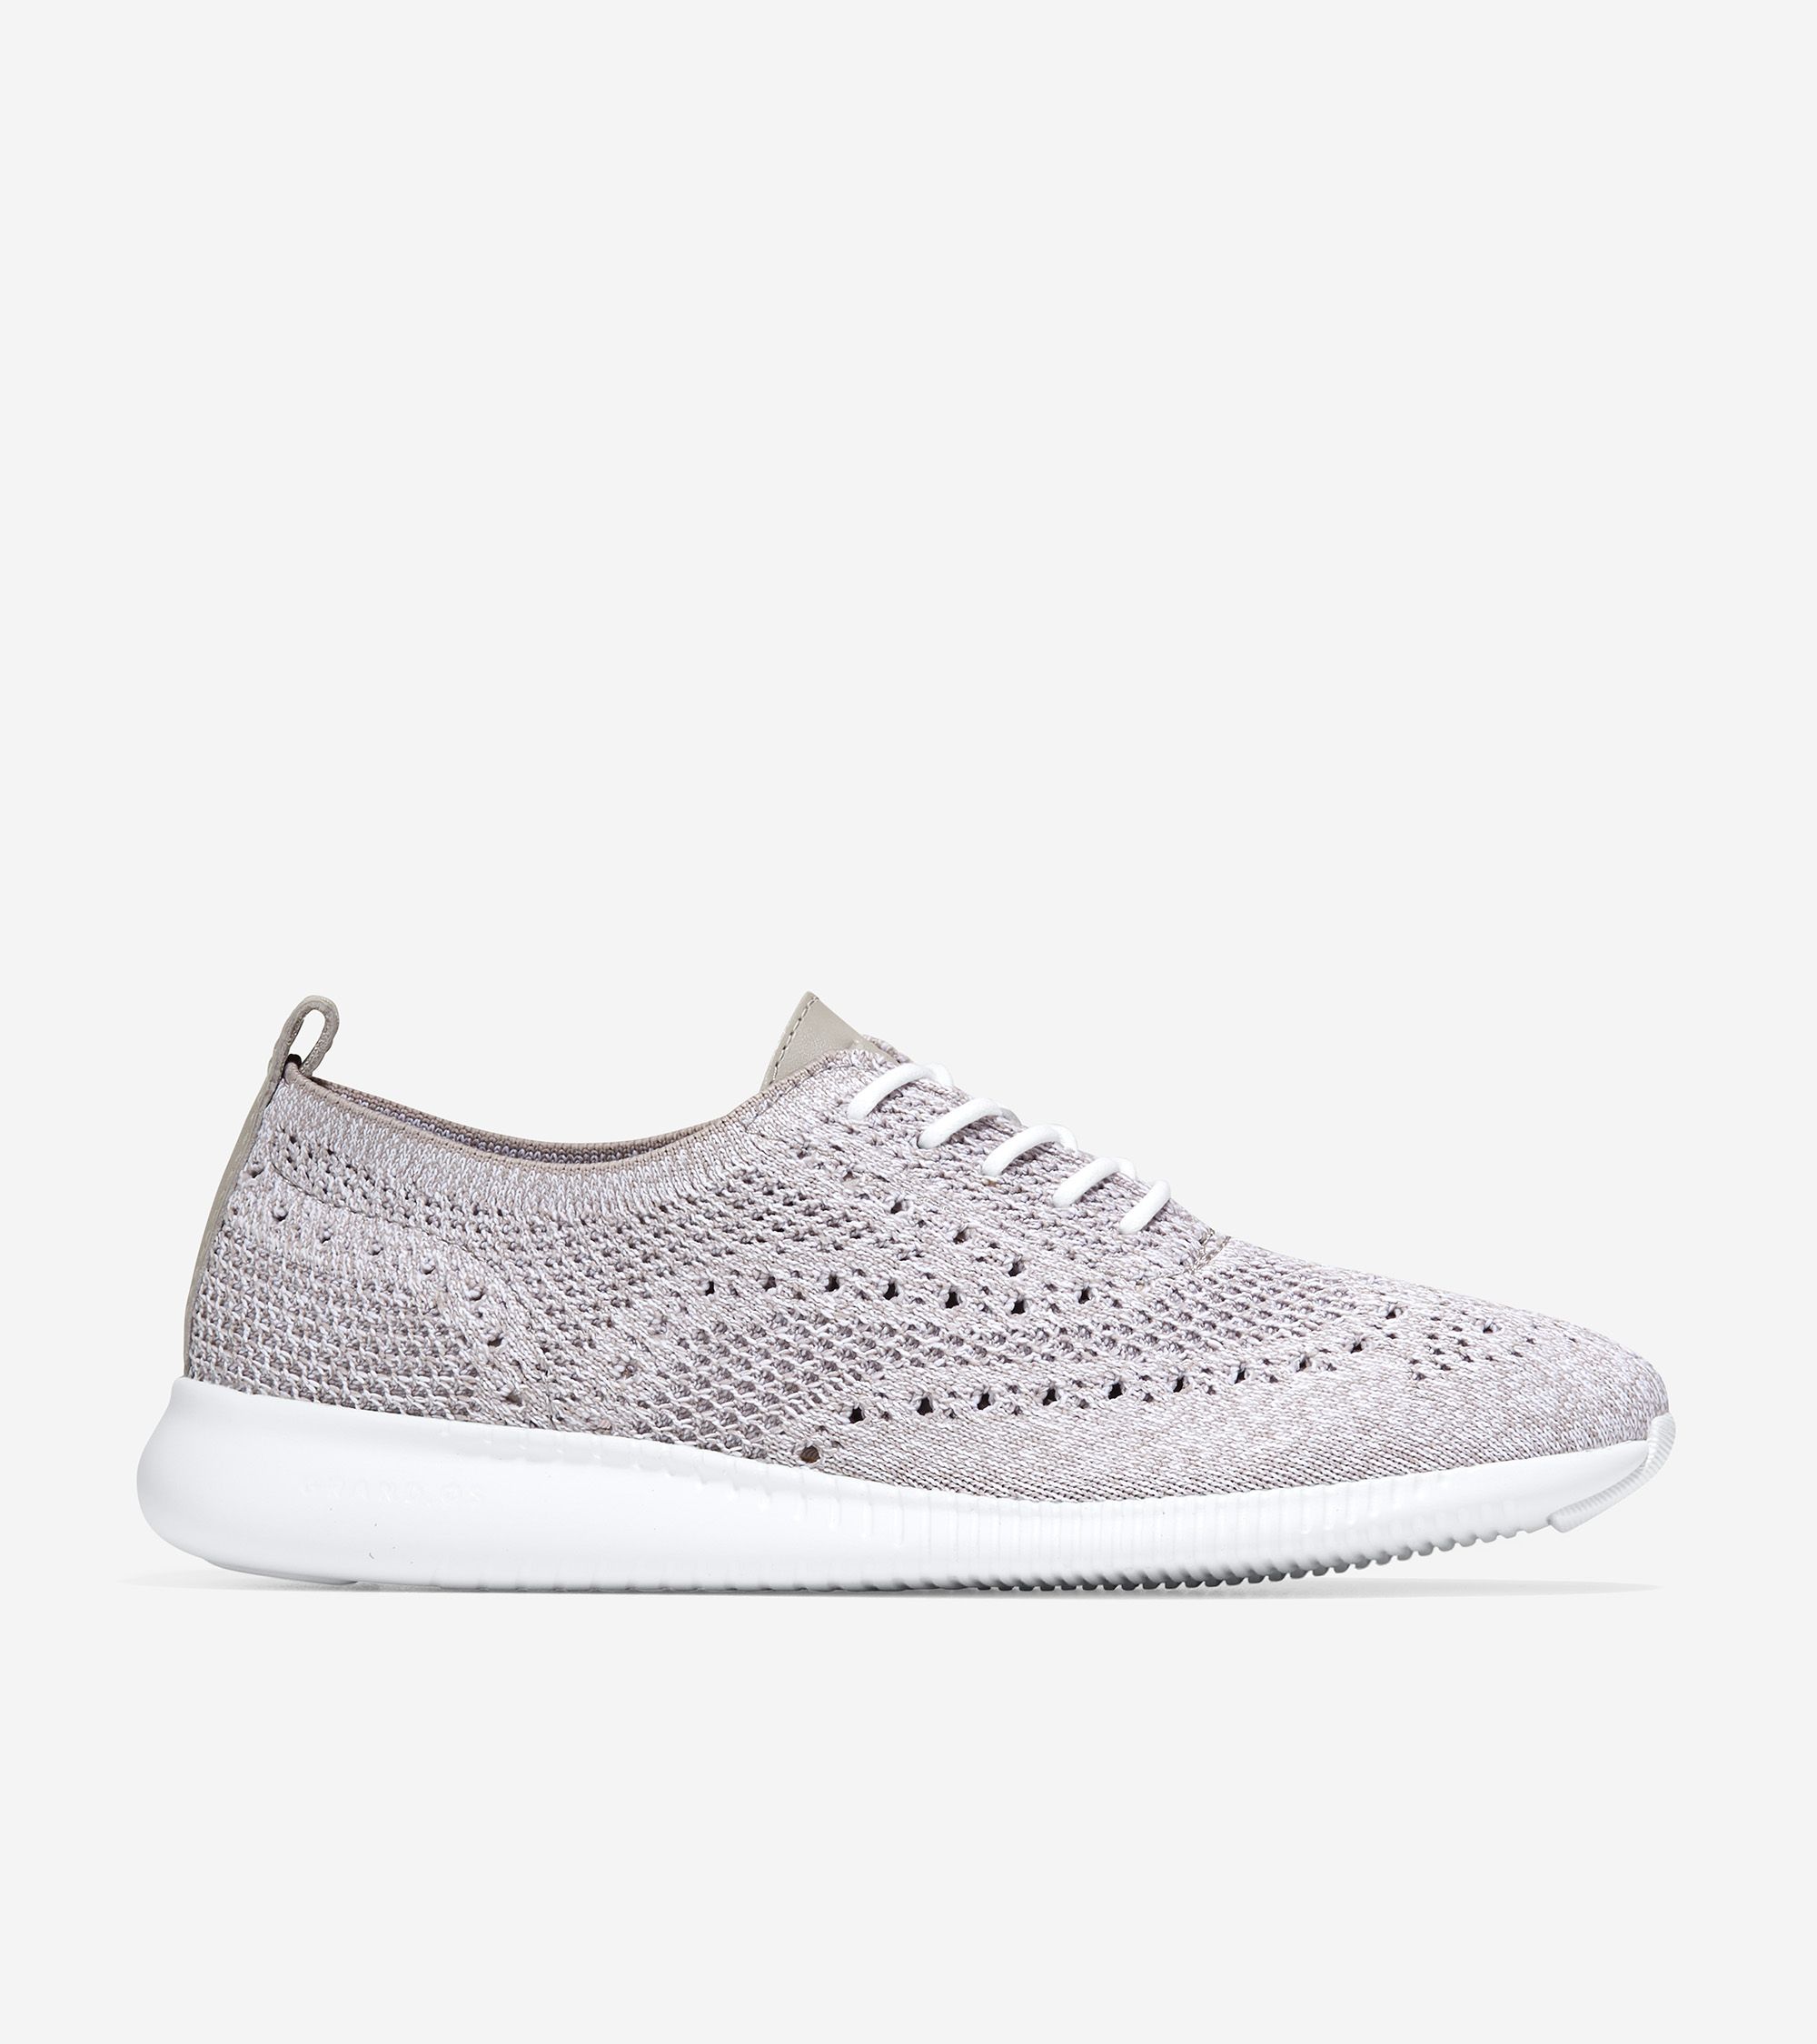 Women's Women's 2.ZERØGRAND Wingtip Oxford in Paloma-Optic White Stitchlite™ | Cole Haan | Cole Haan (US)